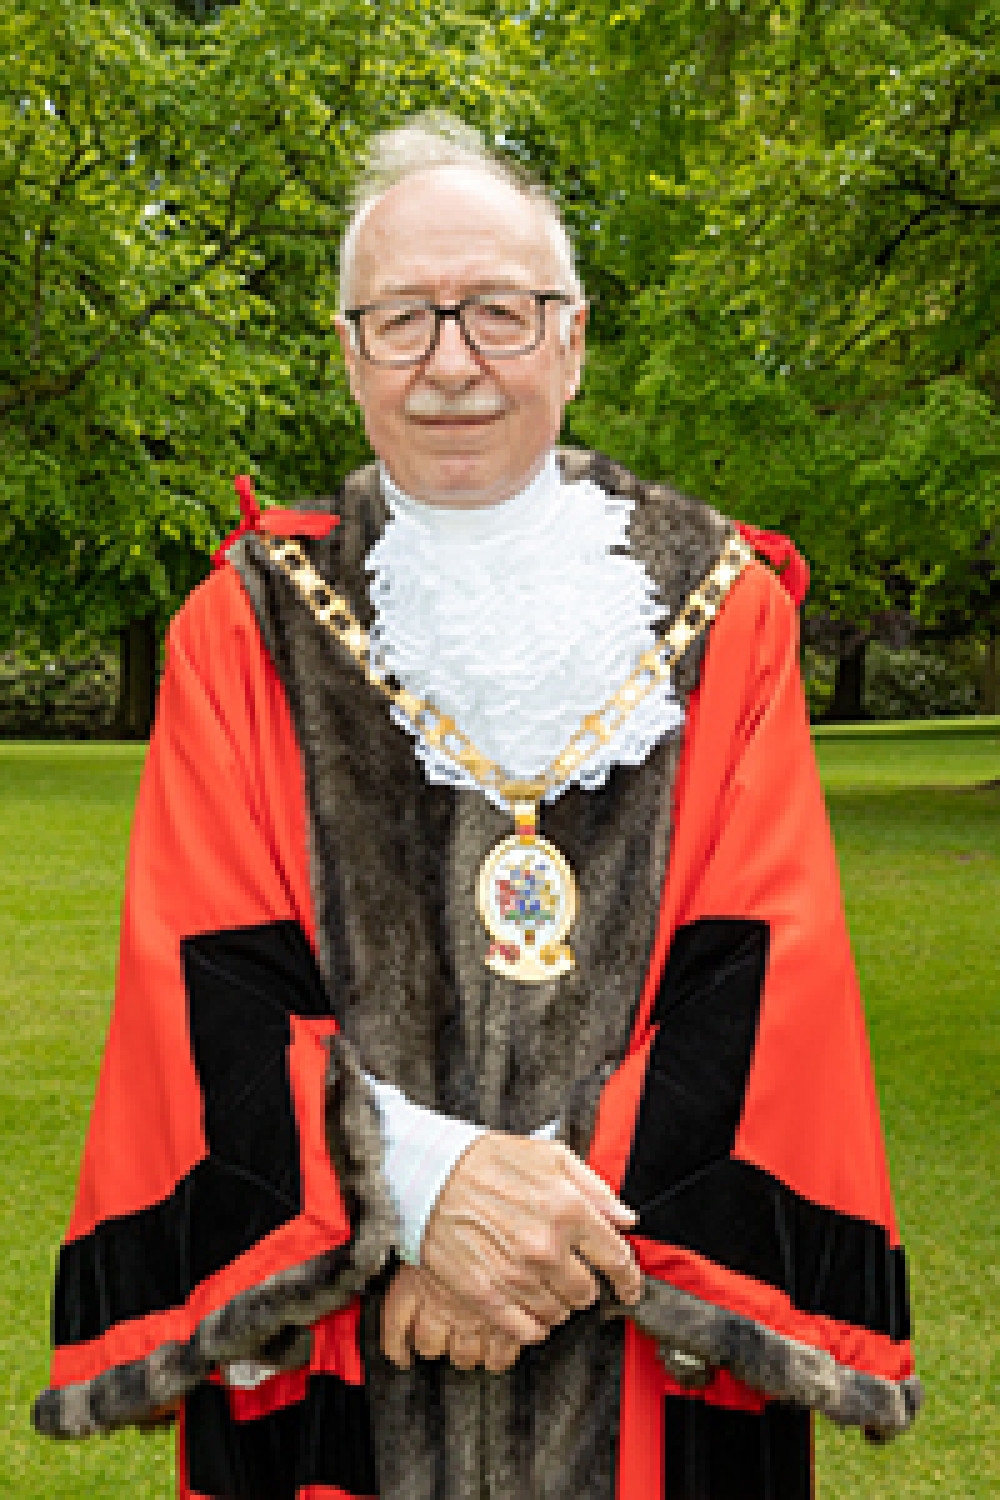 Veterans will be joined by the Cheshire East Mayor at their event this weekend. (Photo: Cheshire East Council)